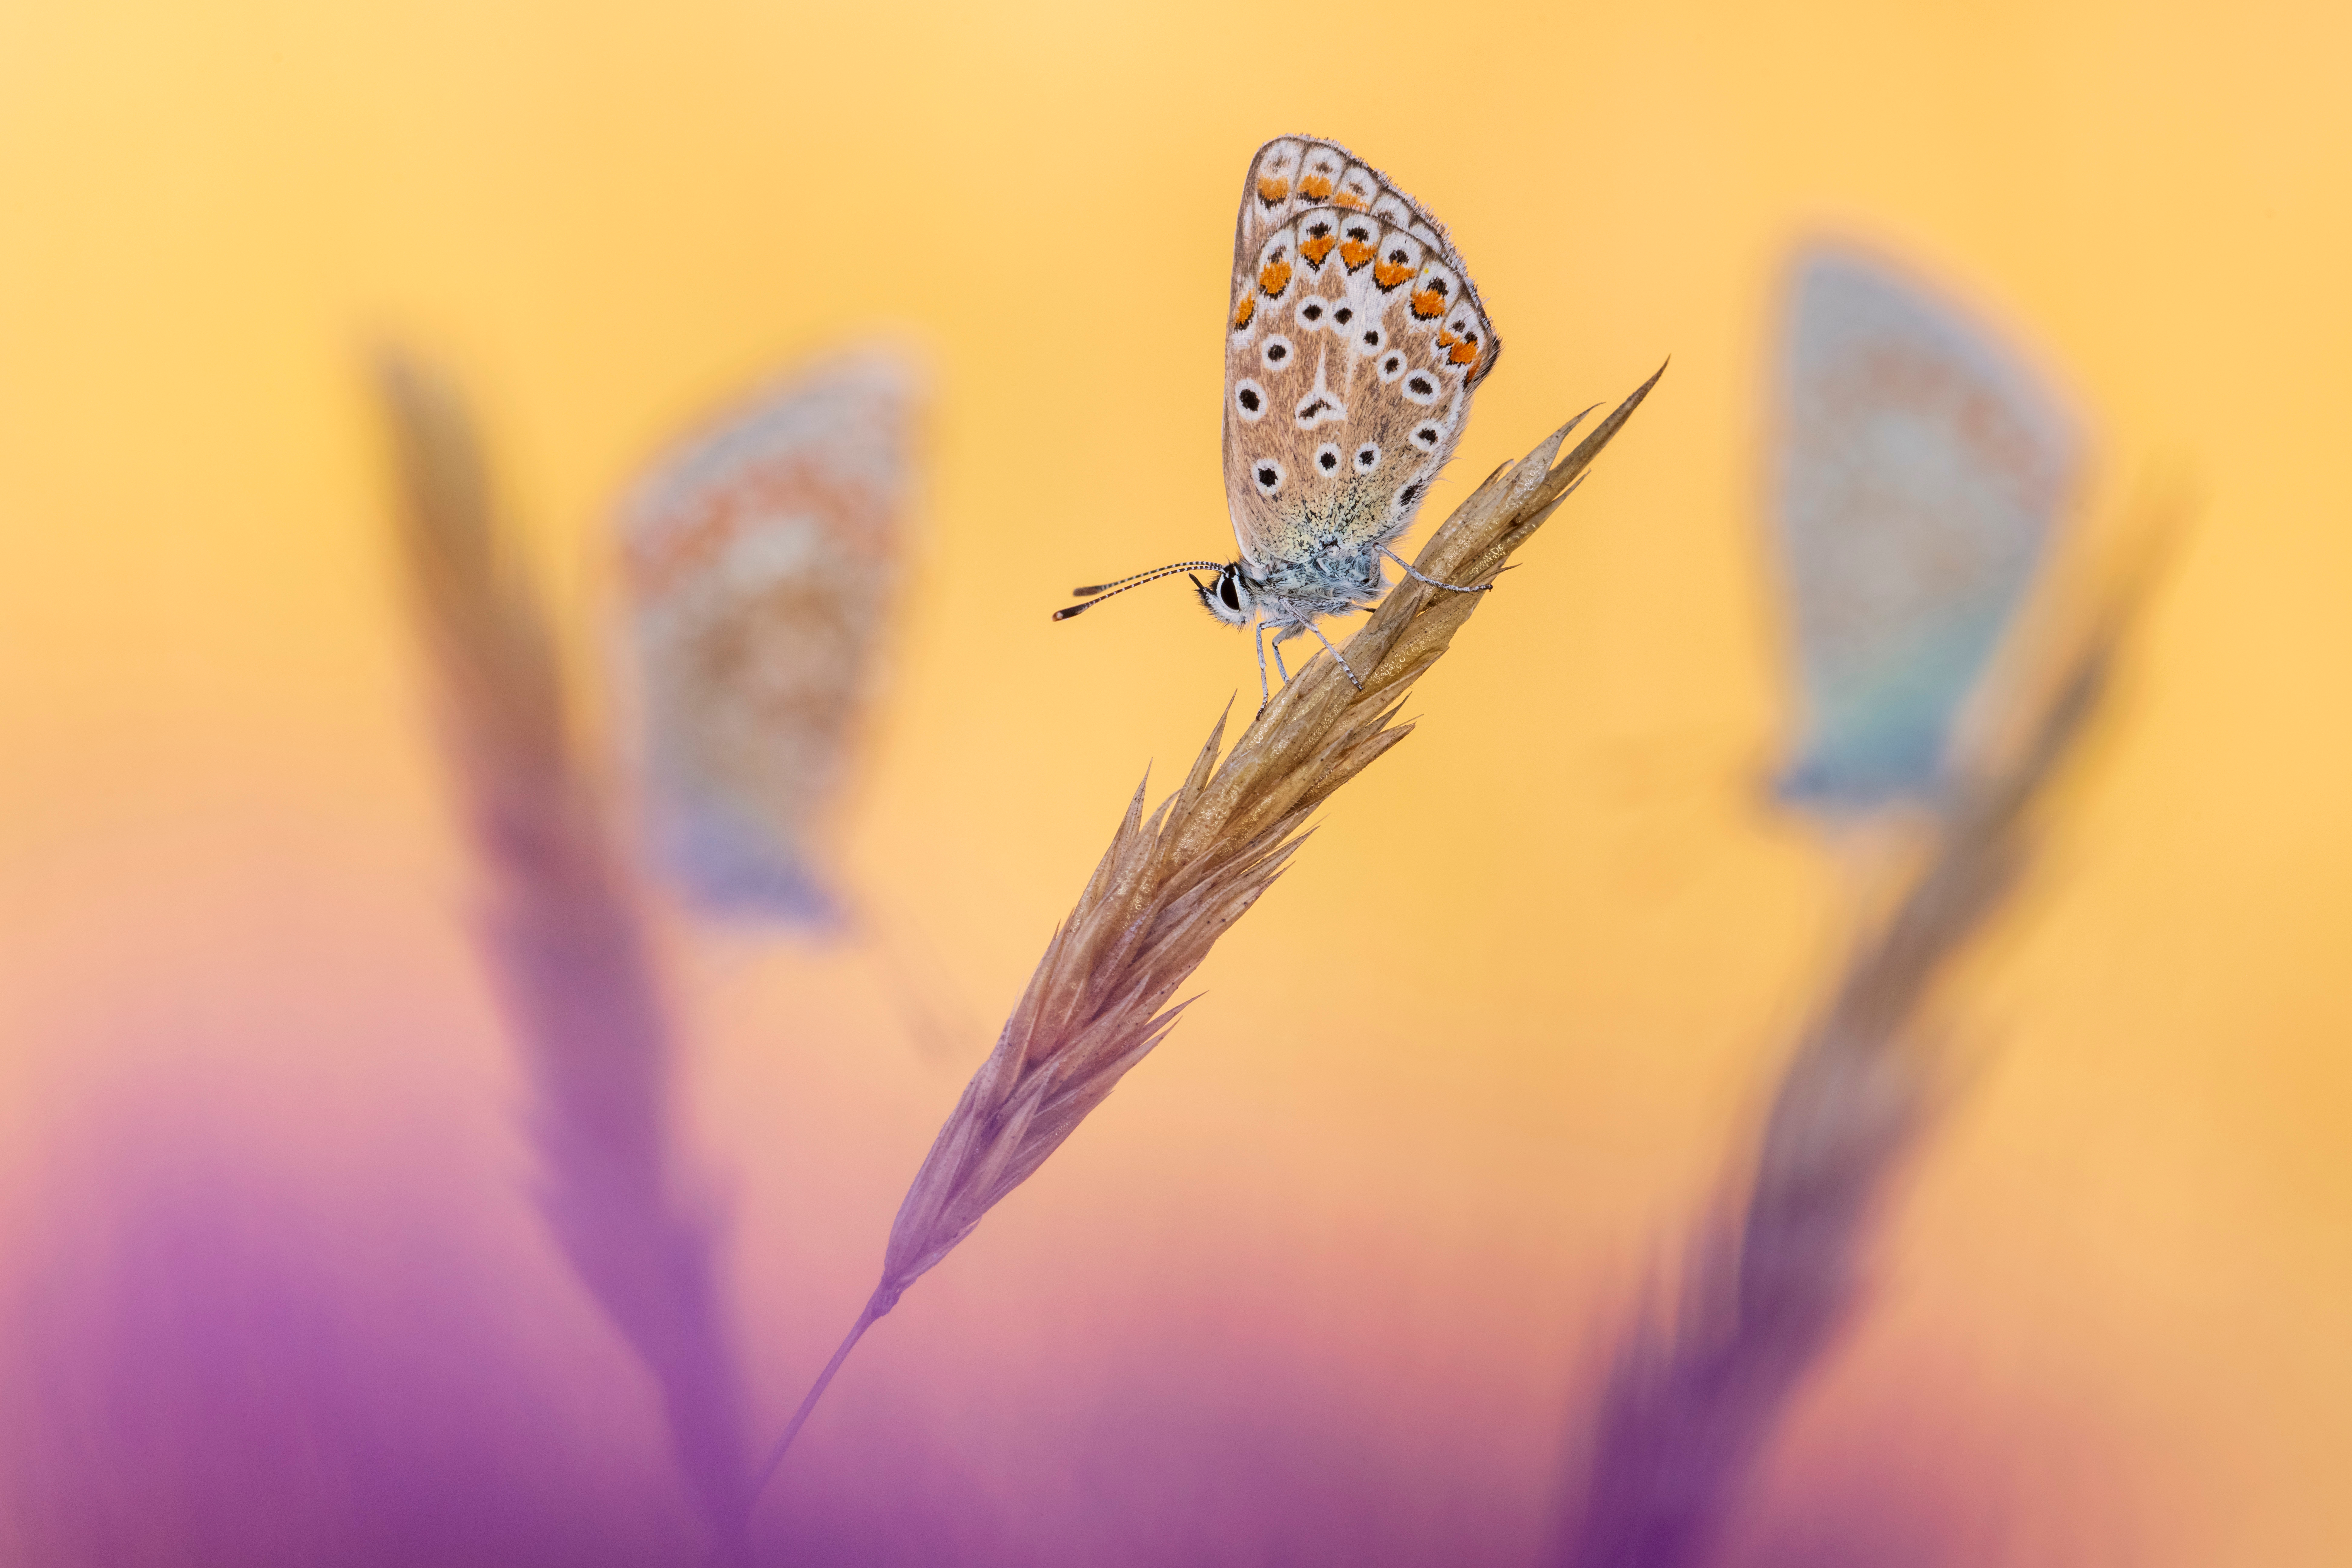 three butterflies perch on three sprigs of wheat. the centre butterfly is the one in focus against a yellow and purple hazy background